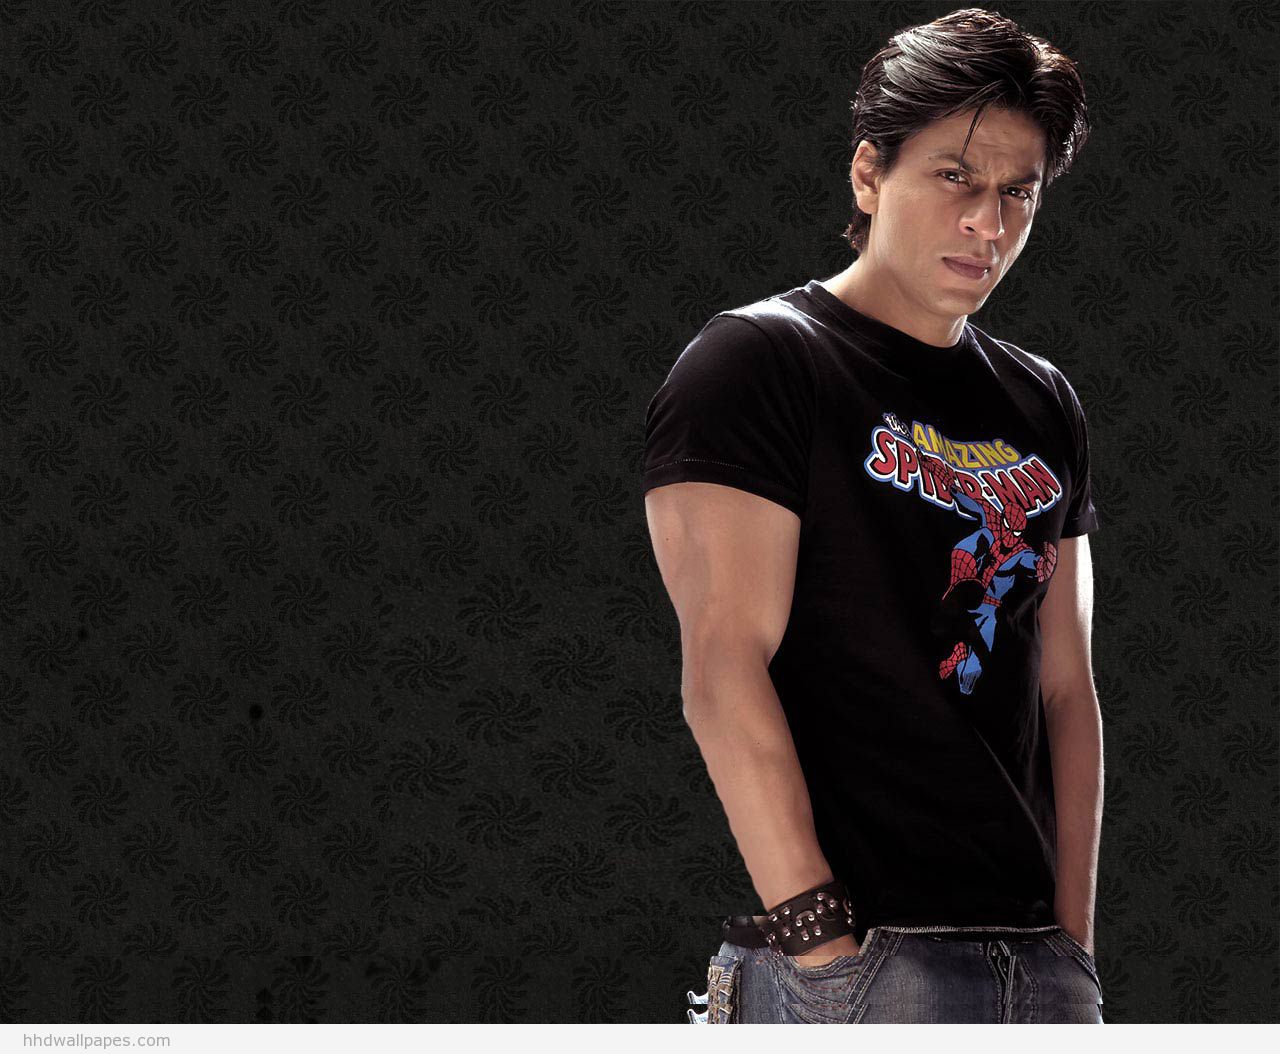 Shahrukh khan new look hd wallpapers | Wallpapers Wide Free